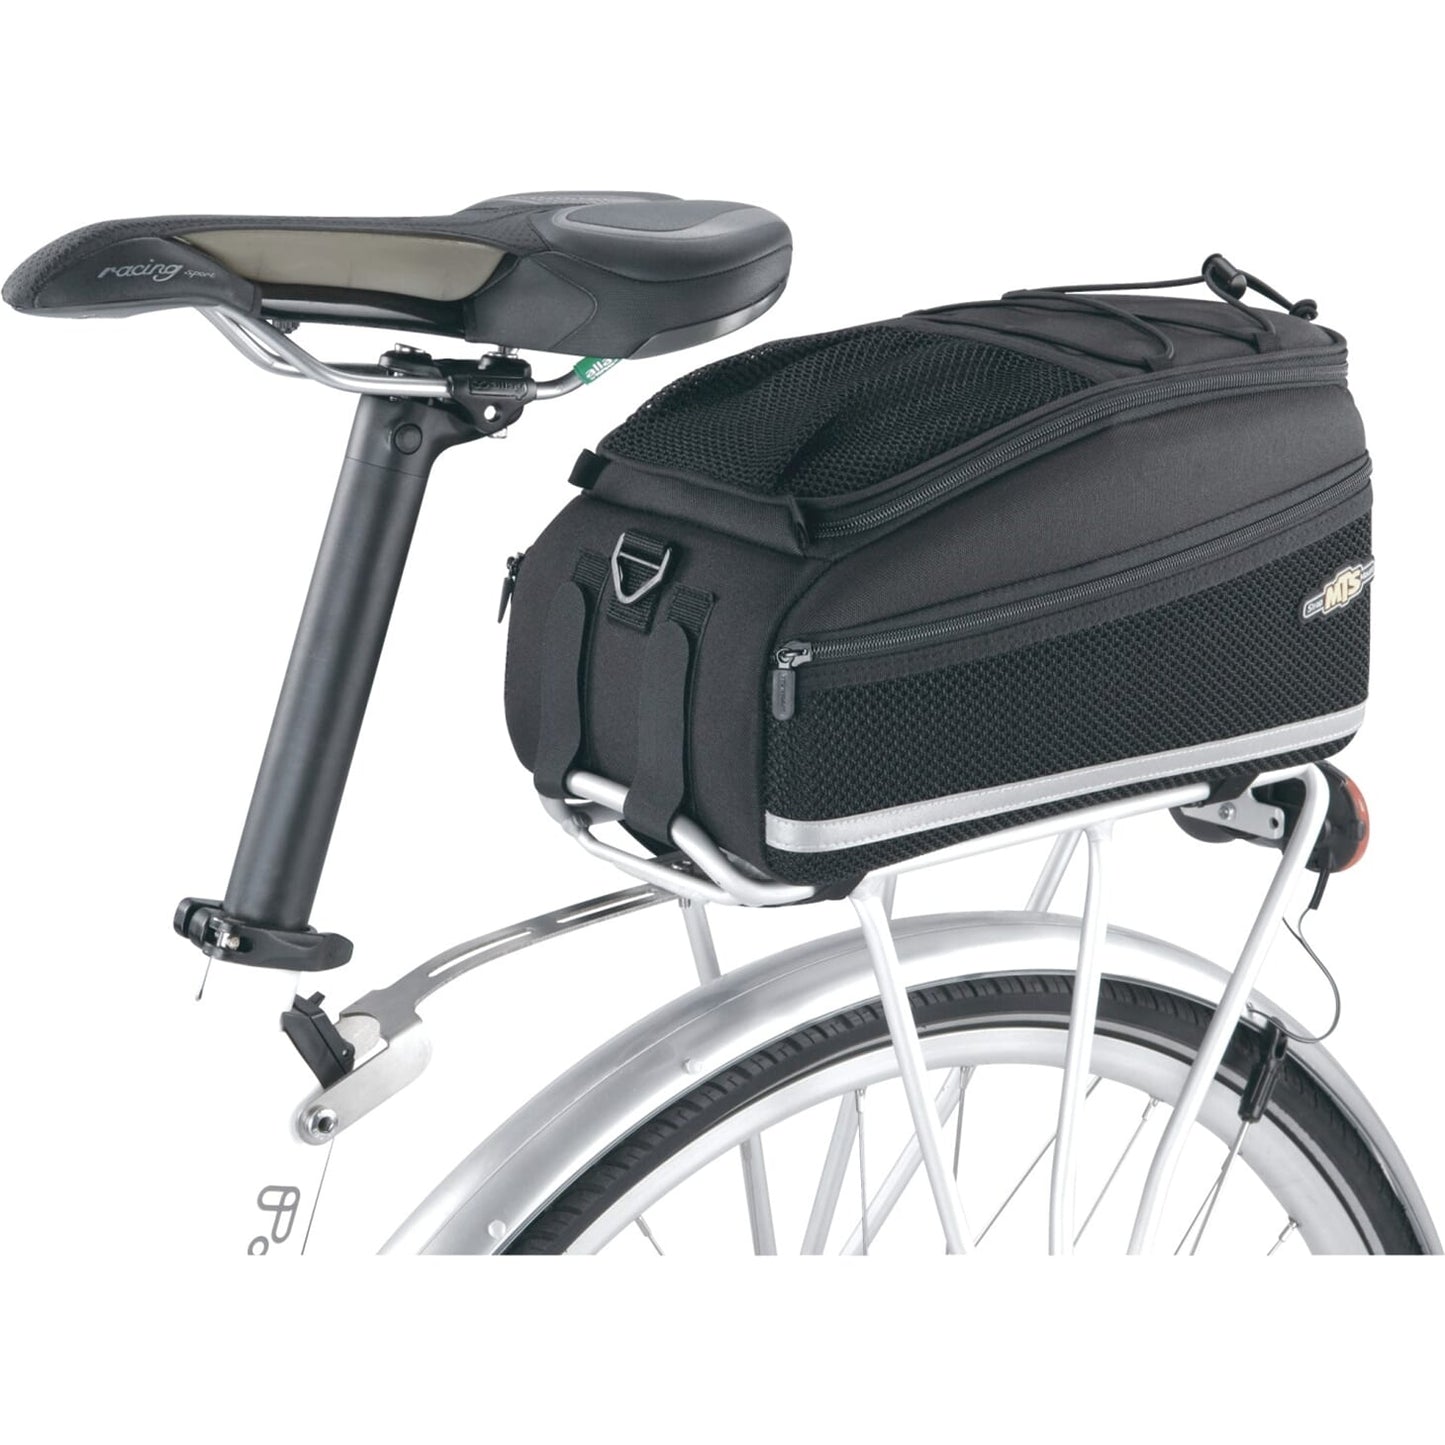 Topak Dragertas MTS BASS TRUNK EX - Backpack in bicicletta Nero 8L